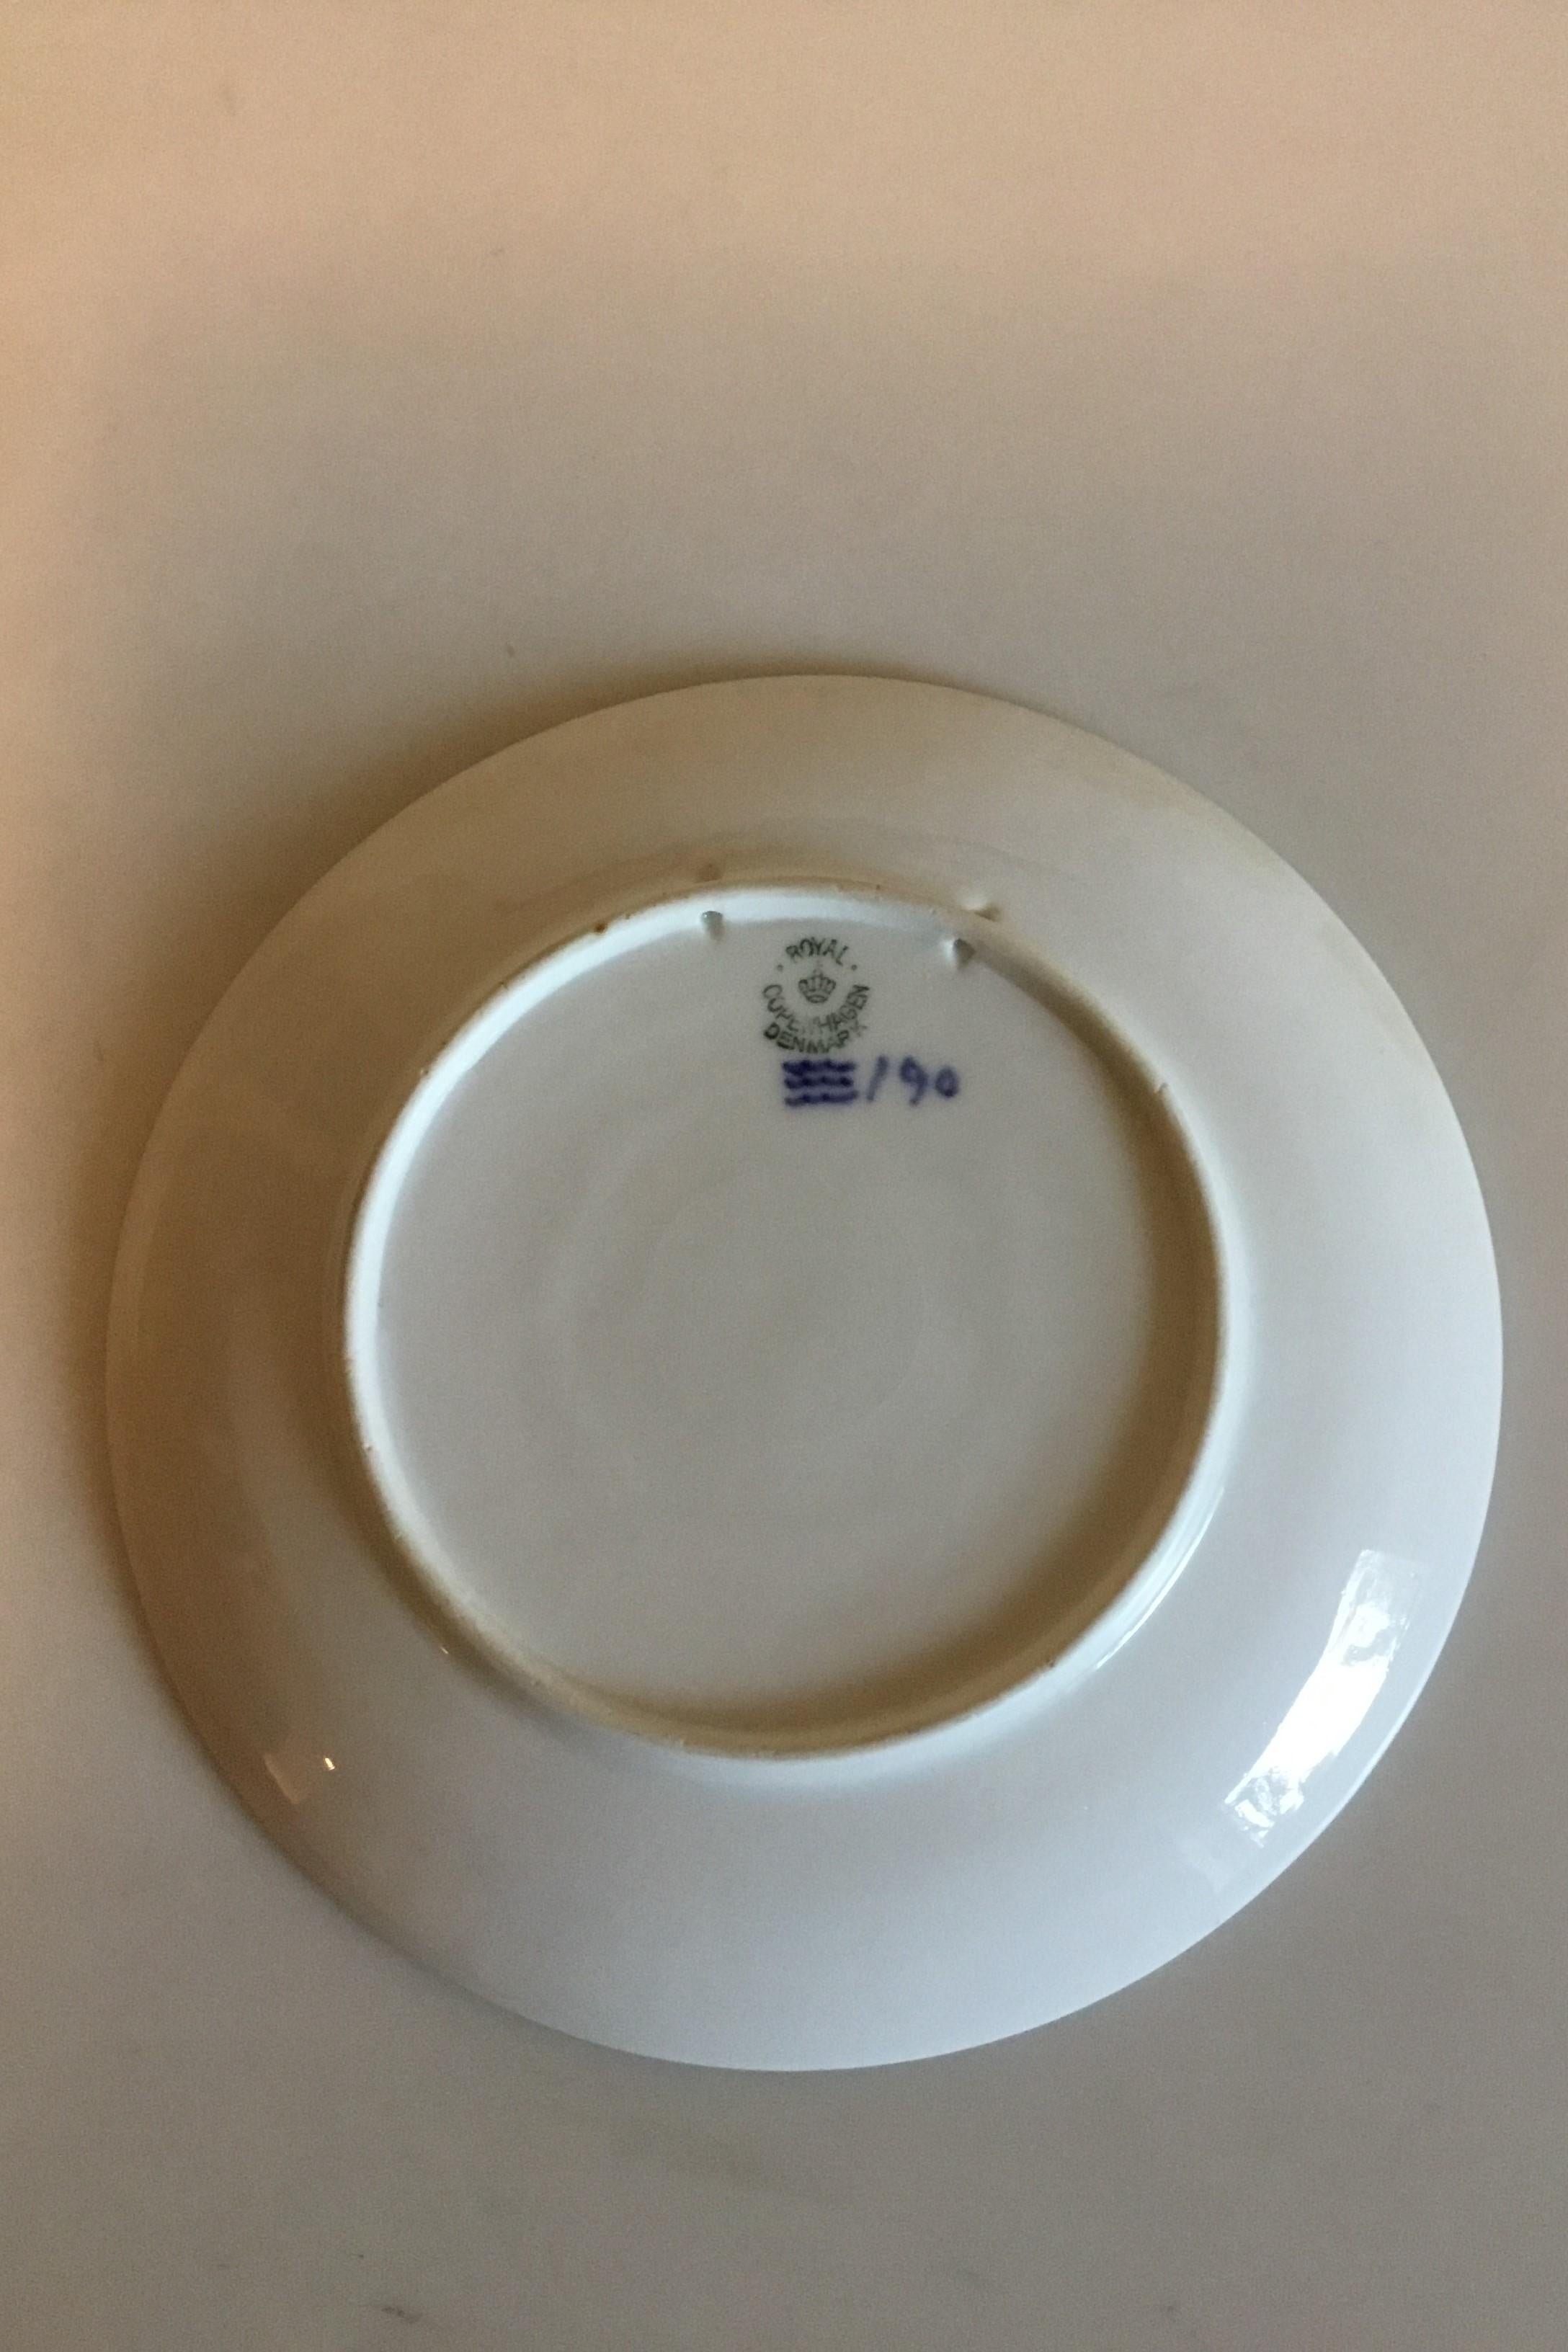 Royal Copenhagen commemorative plate from 1923 RC-CM215. Measures 18 cm / 7 3/32 in. and is in perfect condition.

Child in swaddling clothes. Inscription: PRINSESSE HELENAS BØRNEHJEM DANMARK (Princess Helena's home for children). Made for charity